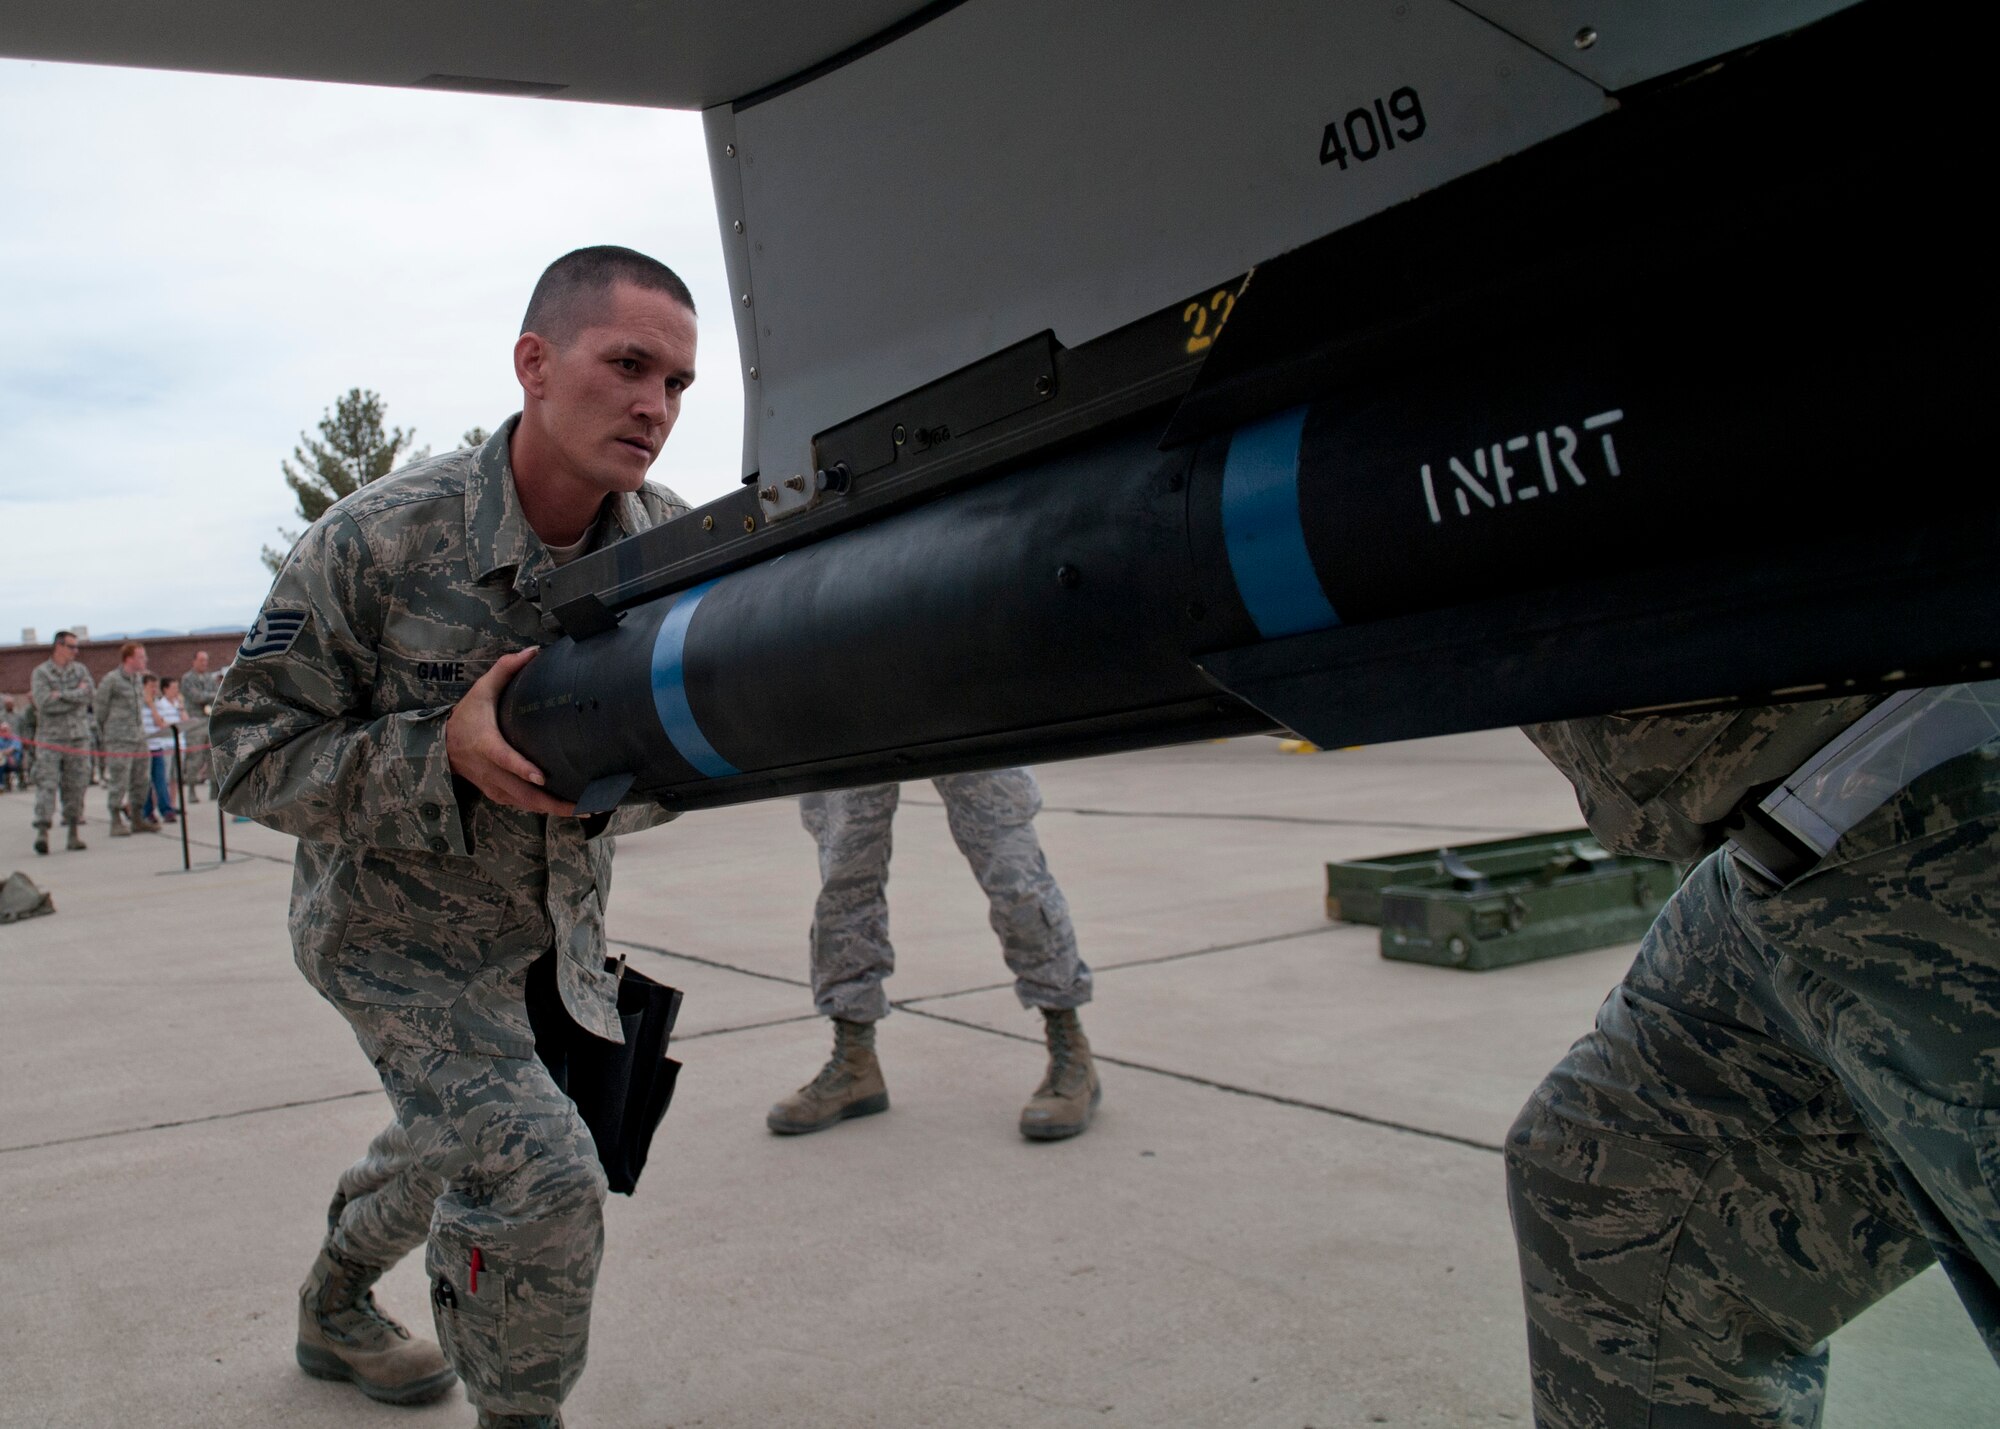 Staff Sgt. Michal Game, 849th Aircraft Maintenance Squadron, loads an inert missile onto an MQ-1 Predator aircraft during a quarterly load-crew competition at Holloman Air Force Base, N.M., April 5. The 849th AMXS pitted two MQ-1 load-crews against each other for the first time to evaluate who could prepare the aircraft for combat the quickest and with the fewest procedural errors. (U.S. Air Force photo by Airman 1st Class Daniel E. Liddicoet/Released)